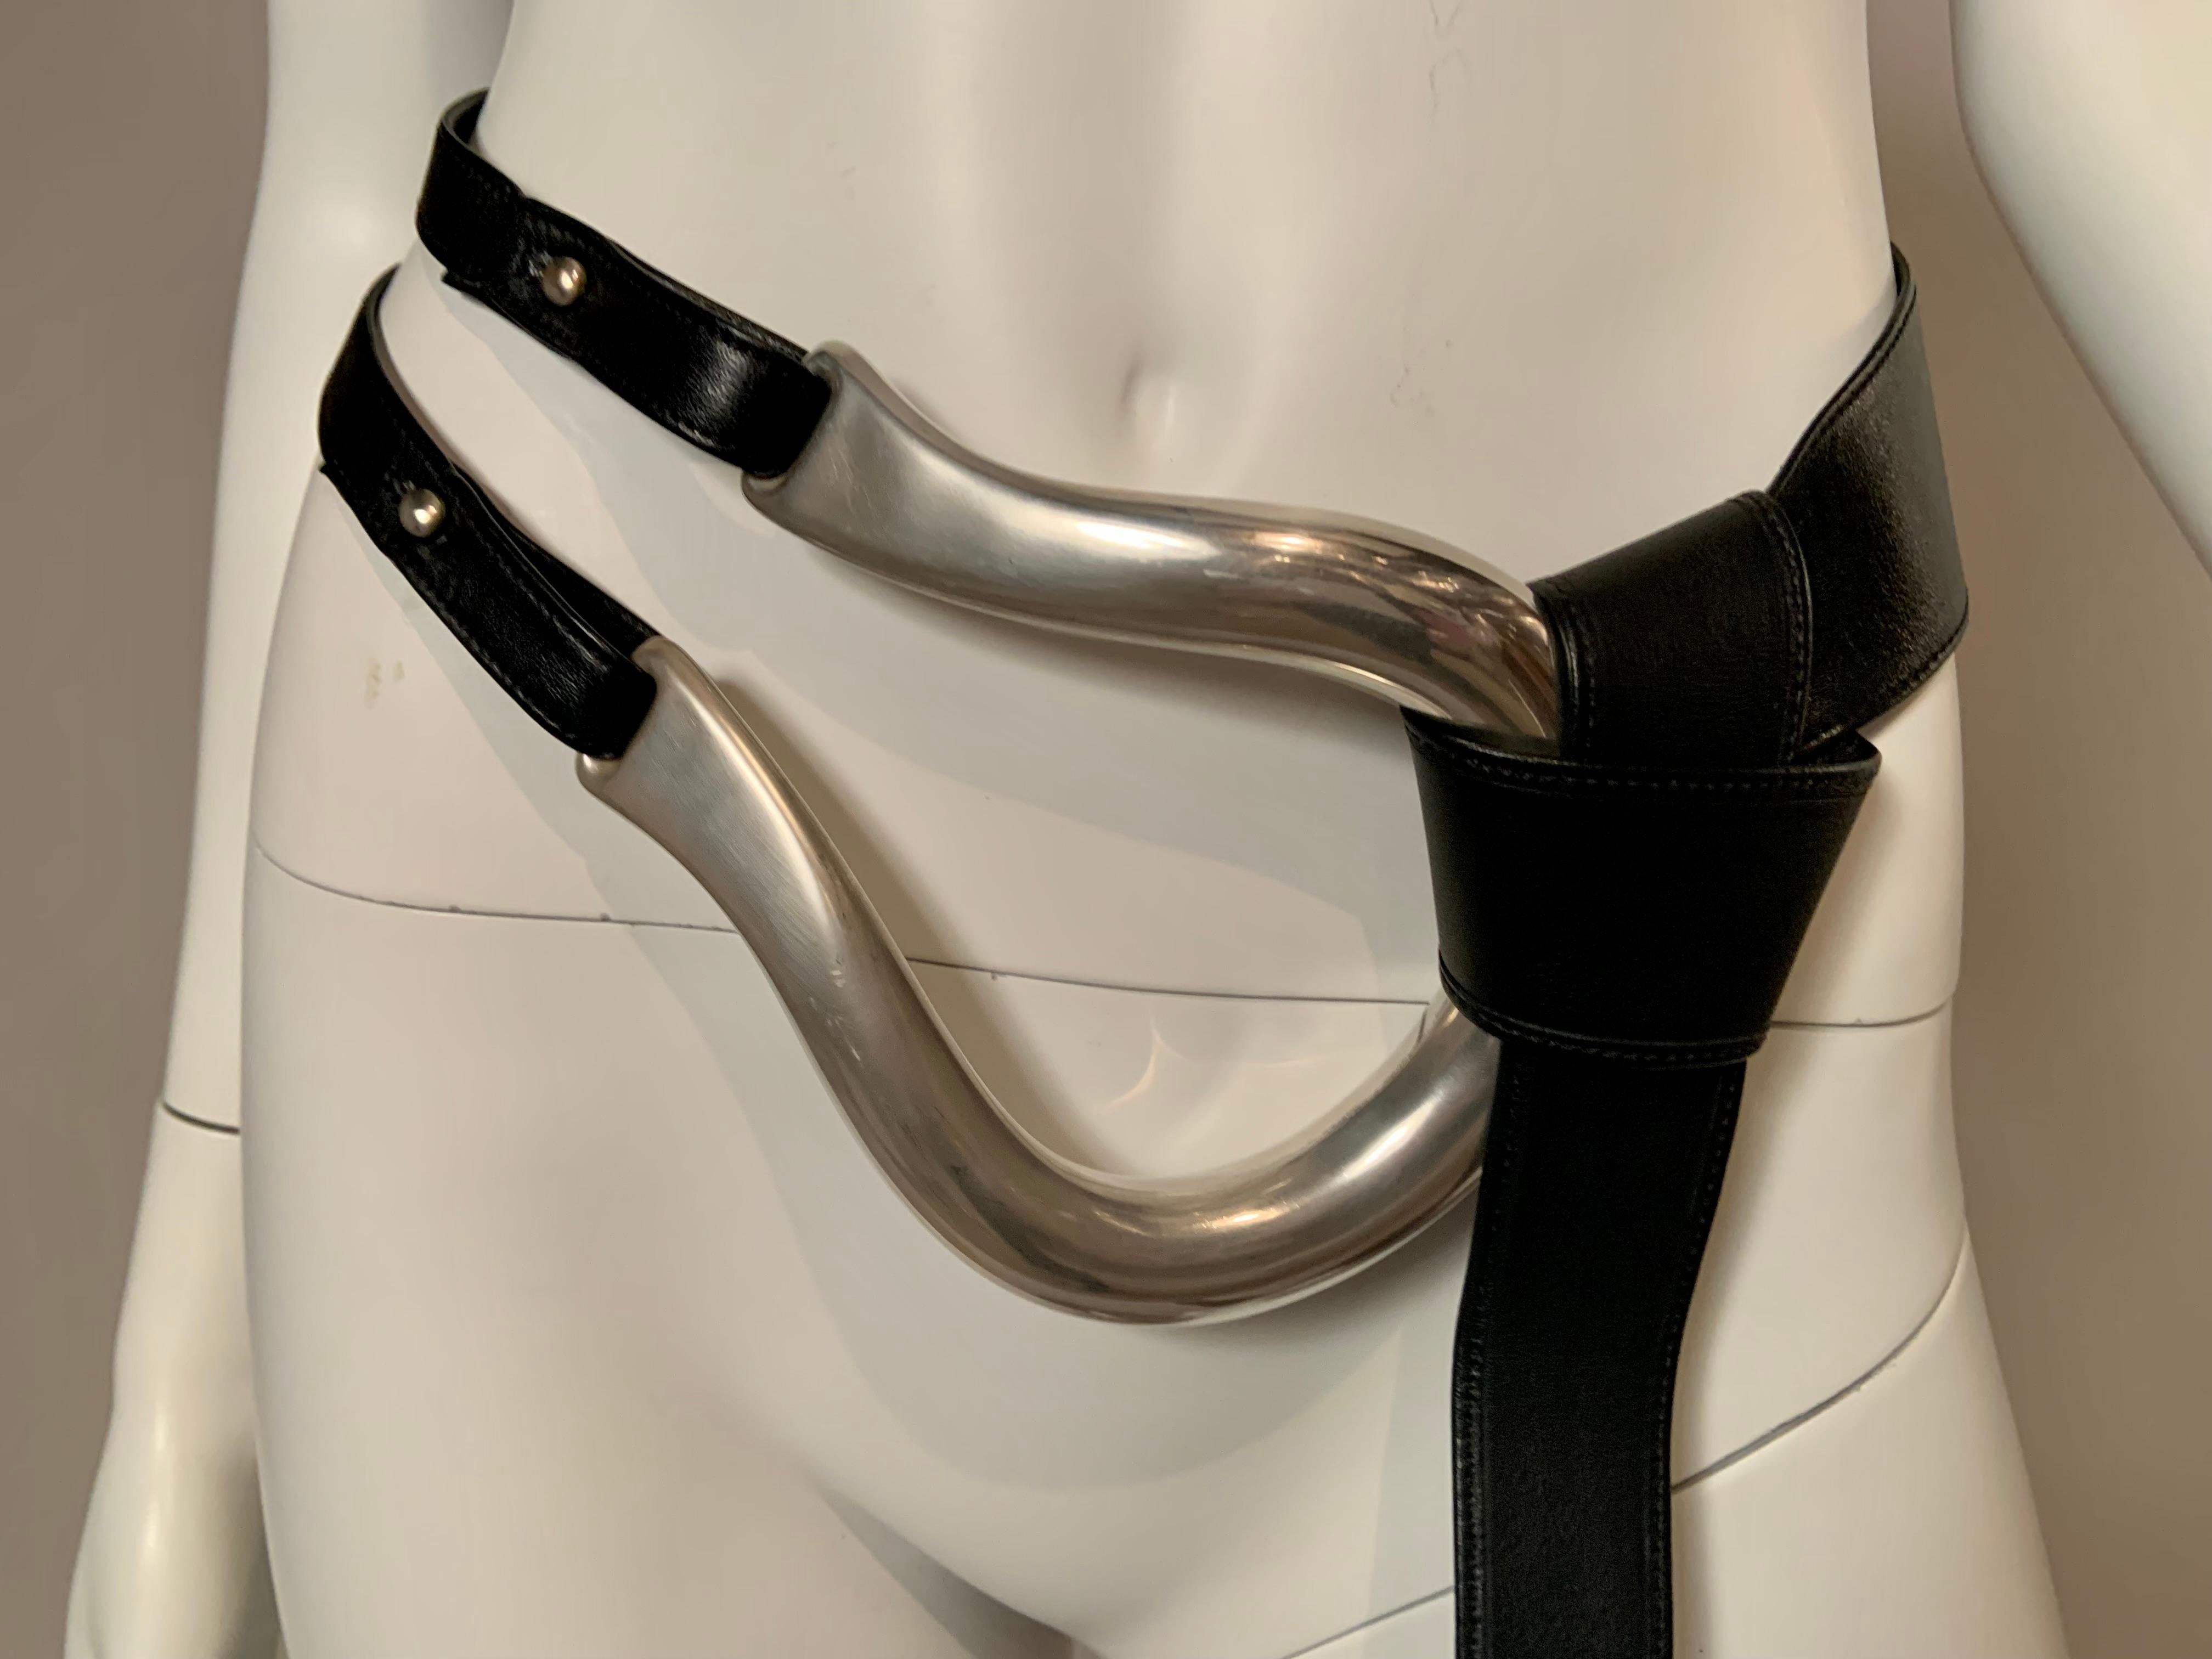 The largest of the the three sizes,  this iconic sterling silver horseshoe buckle and black leather belt was designed by Elsa Peretti for Halston and retailed by Tiffany & Co. The buttons are both marked Peretti and Tiffany & Co. and the buckle is